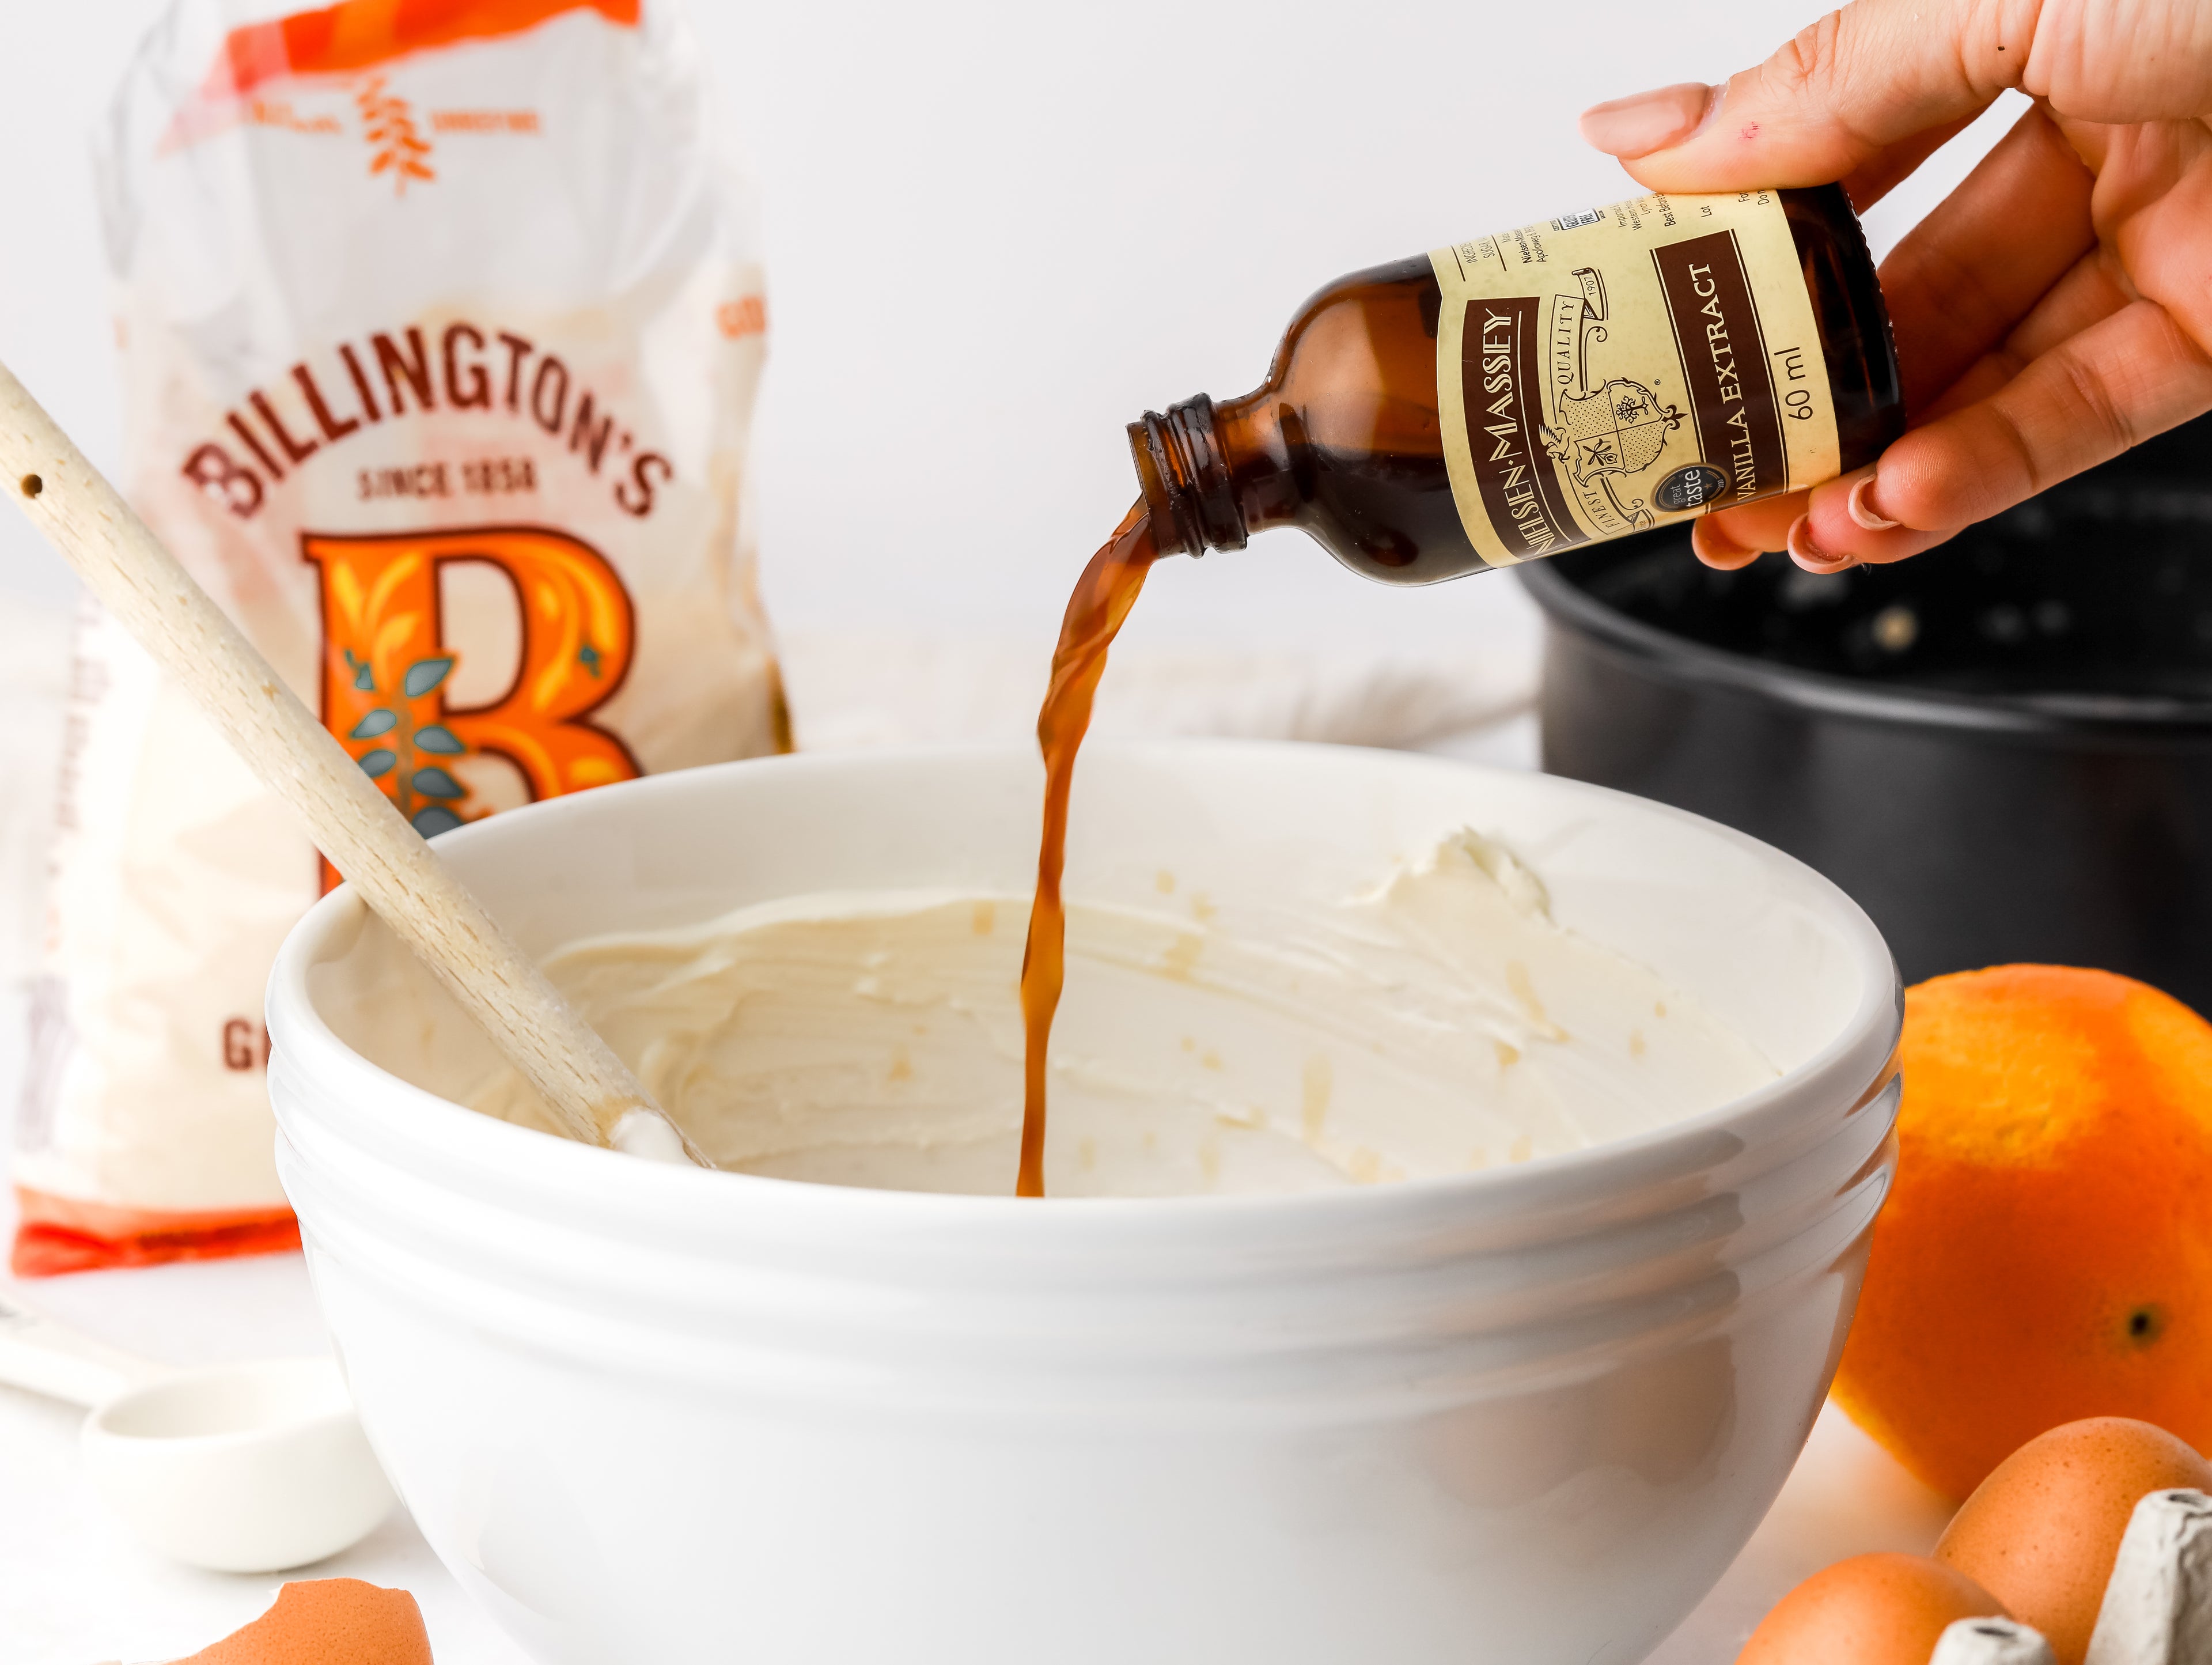 Vanilla extract being poured into a bowl of cheesecake mix with wooden spoon in. Baking tin, orange and pack of sugar in background